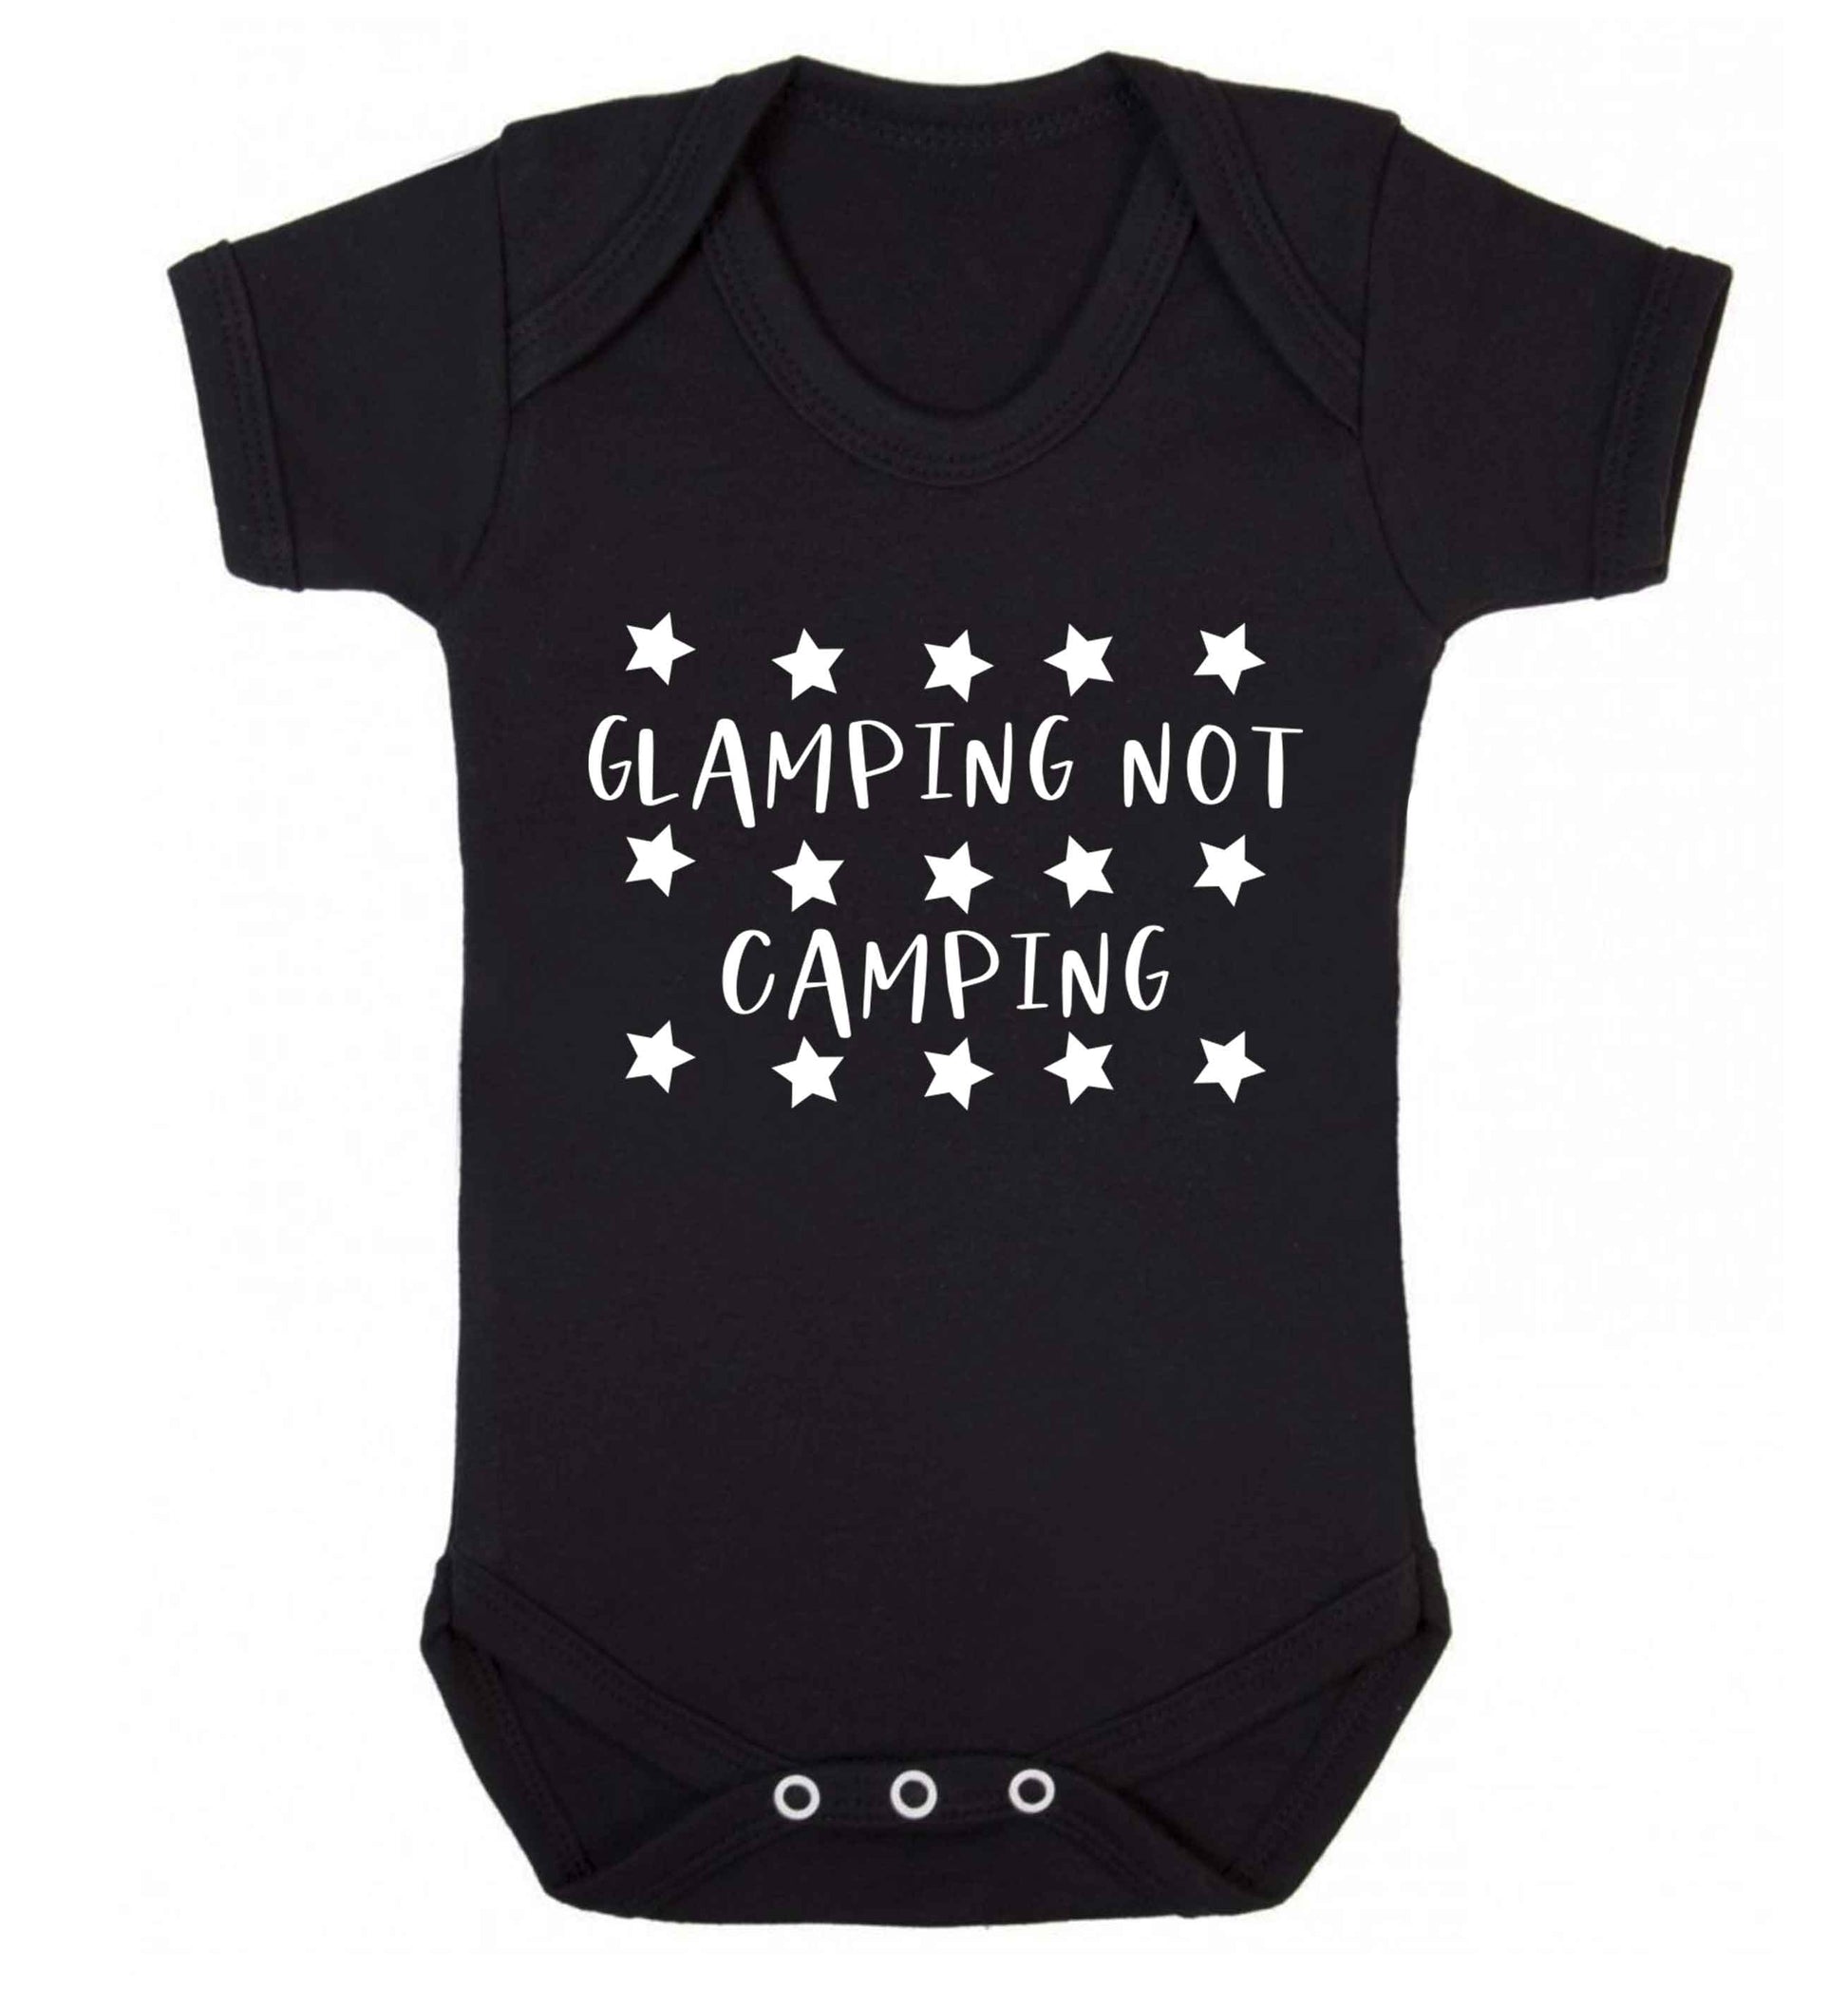 Glamping not camping Baby Vest black 18-24 months